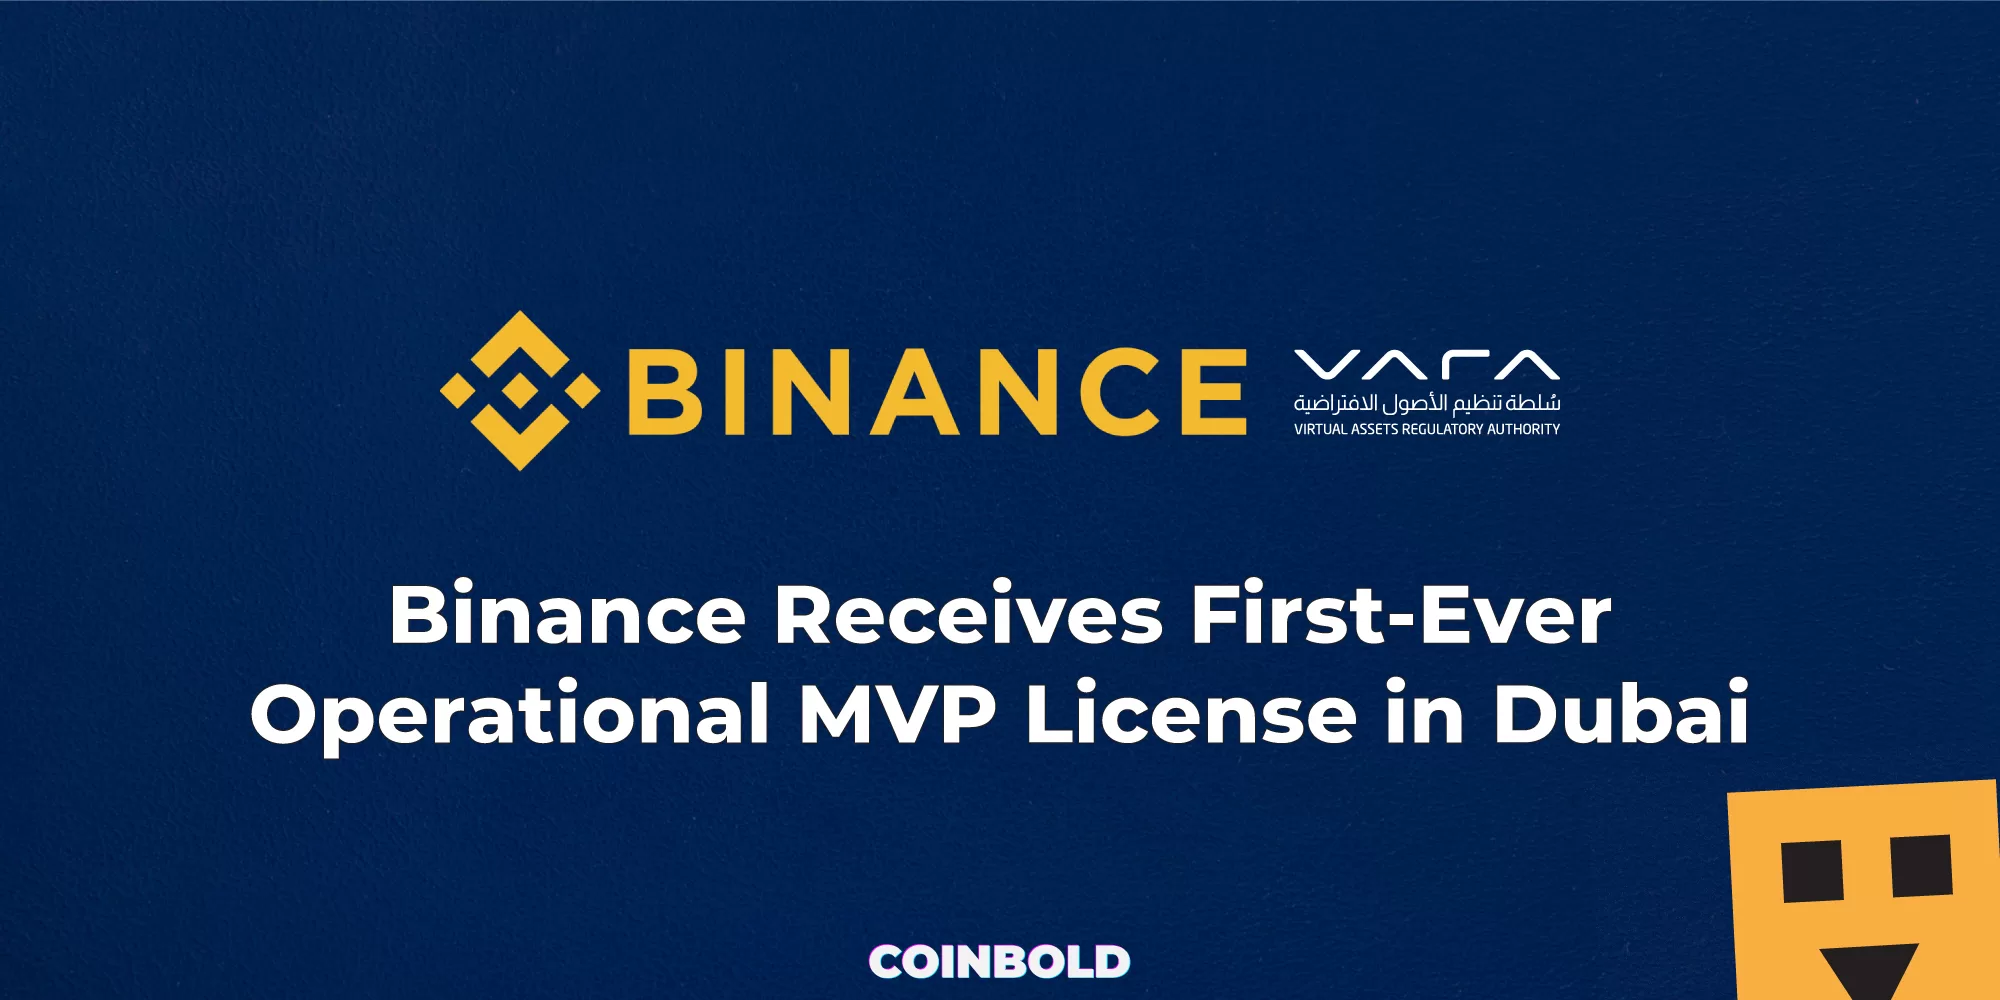 Binance Receives First-Ever Operational MVP License in Dubai